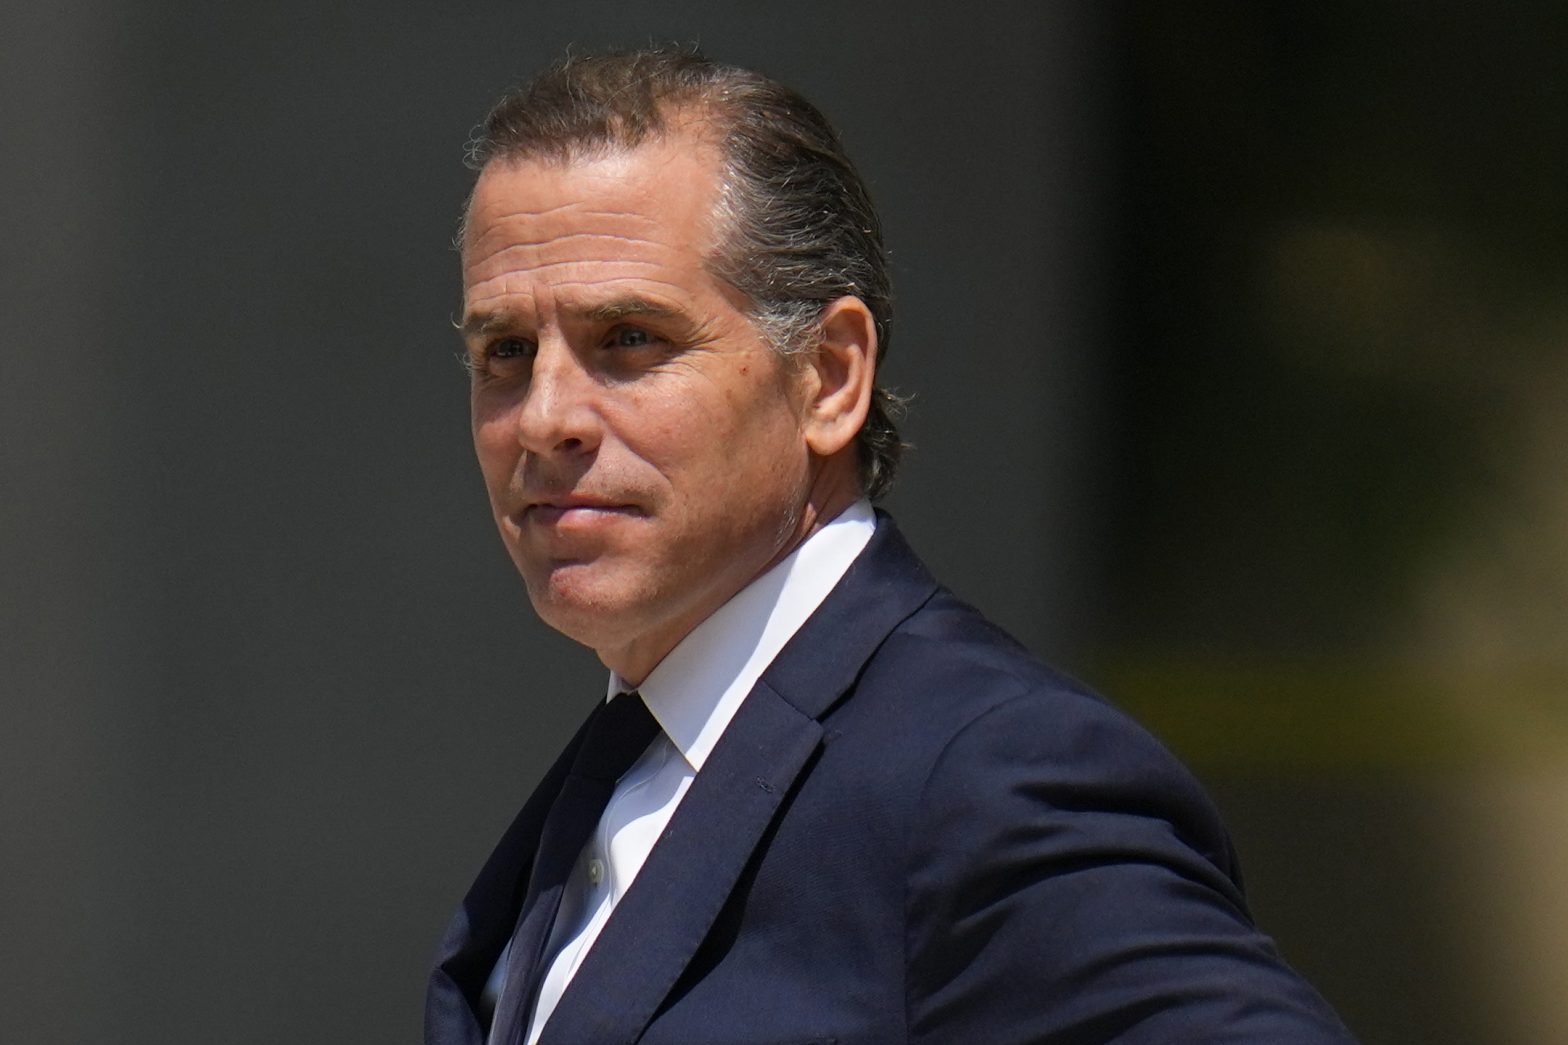 Hunter Biden Indicted on Felony Charges Alleging Years of Tax Evasion